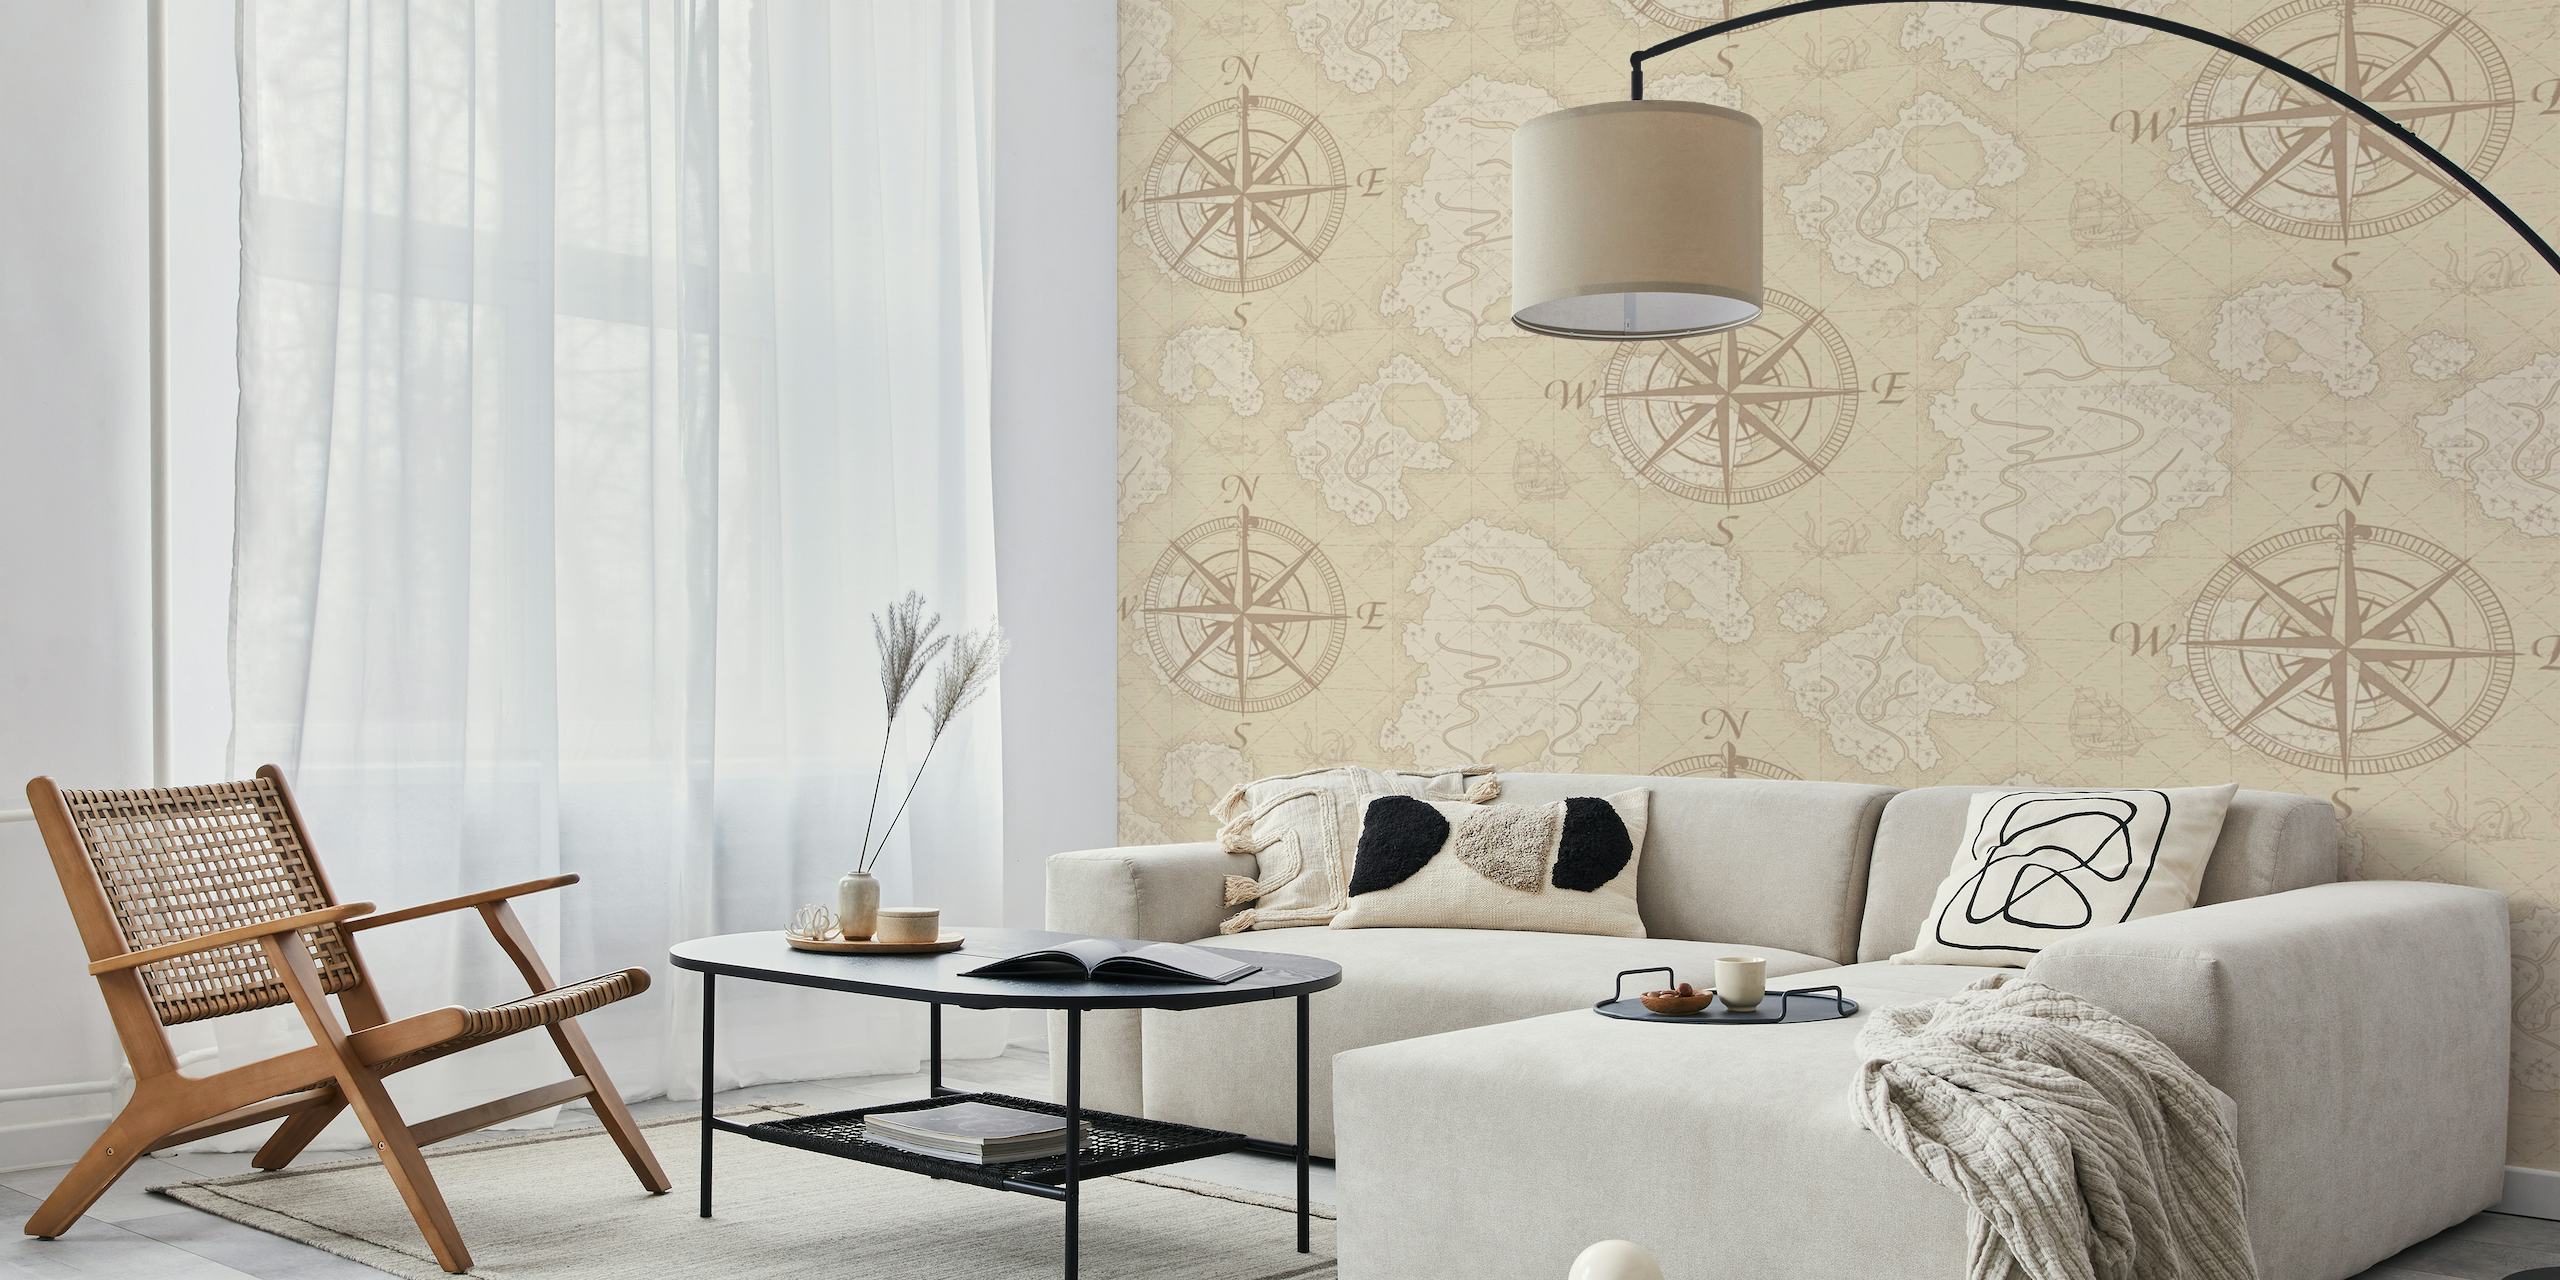 Vintage-inspired wall mural featuring light compass motifs and map symbols on a parchment-like background.